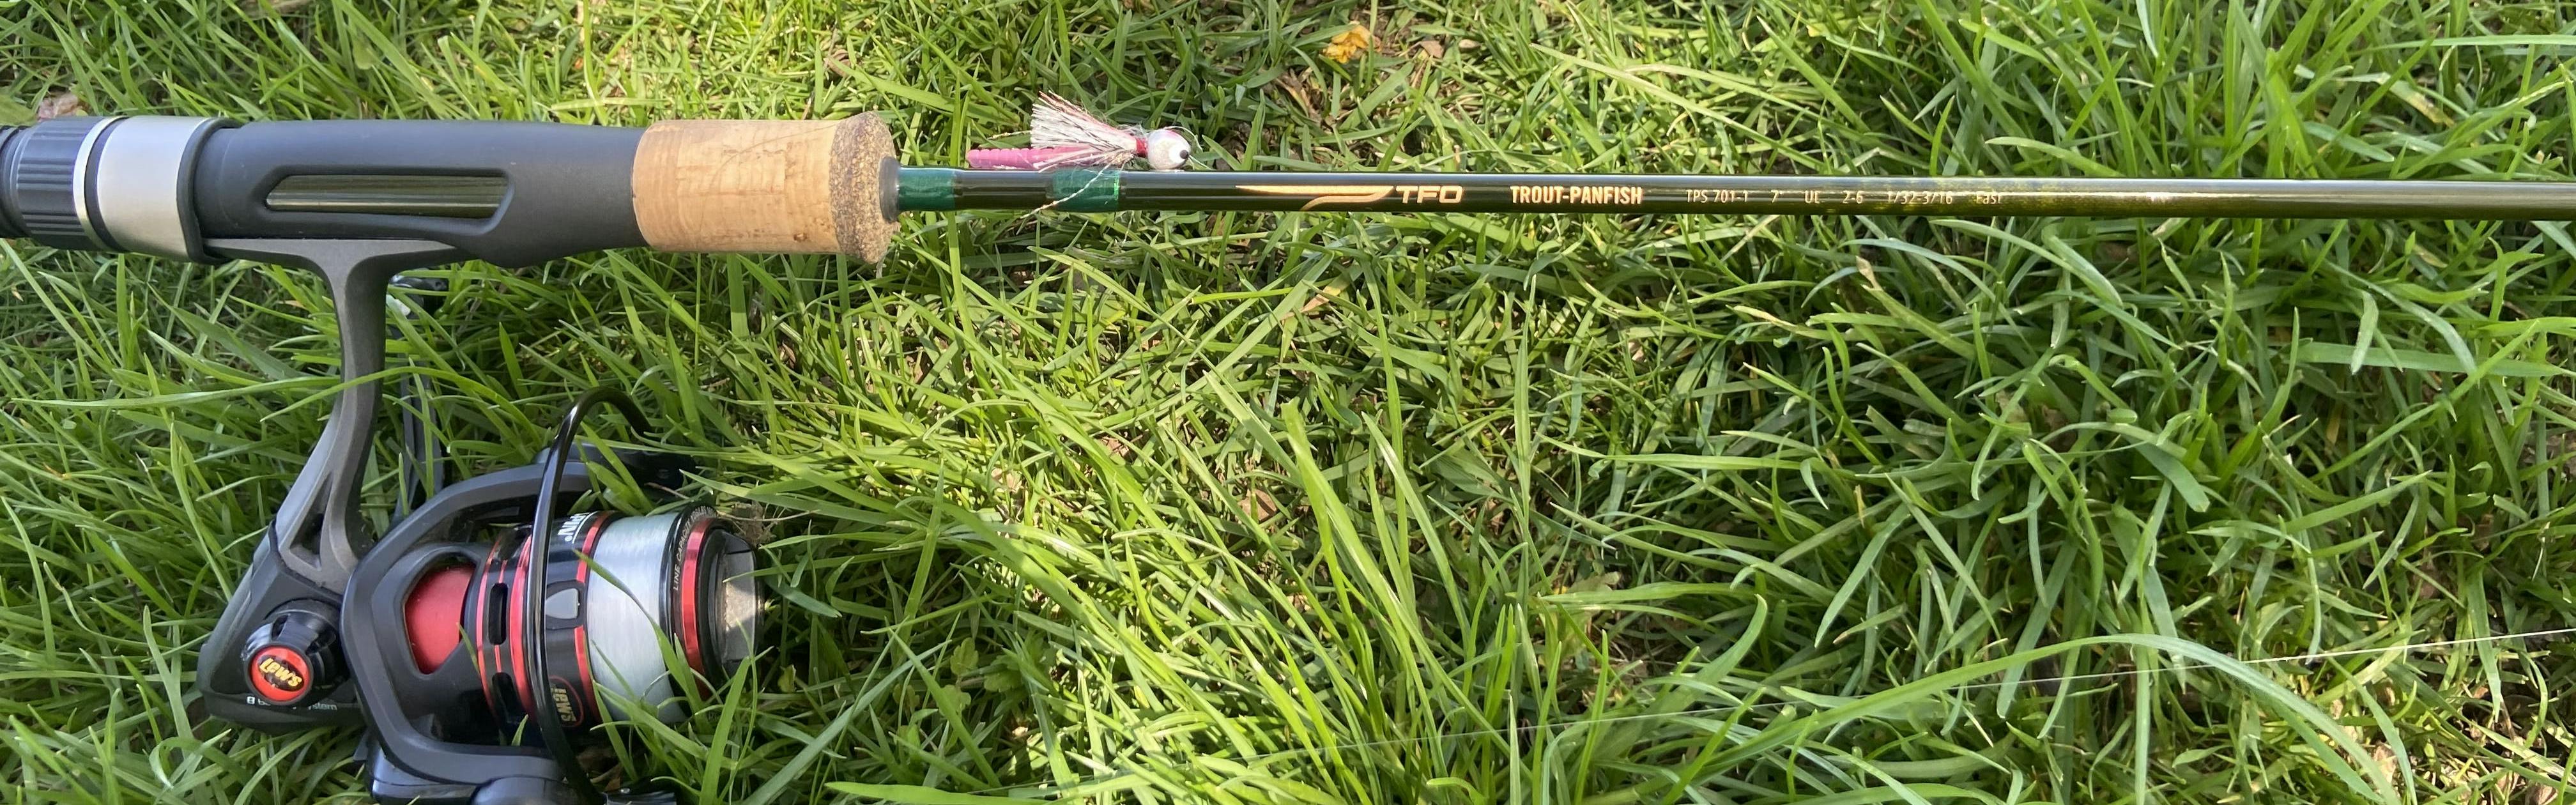 Expert Review: Temple Fork Outfitters Trout-Panfish Rod